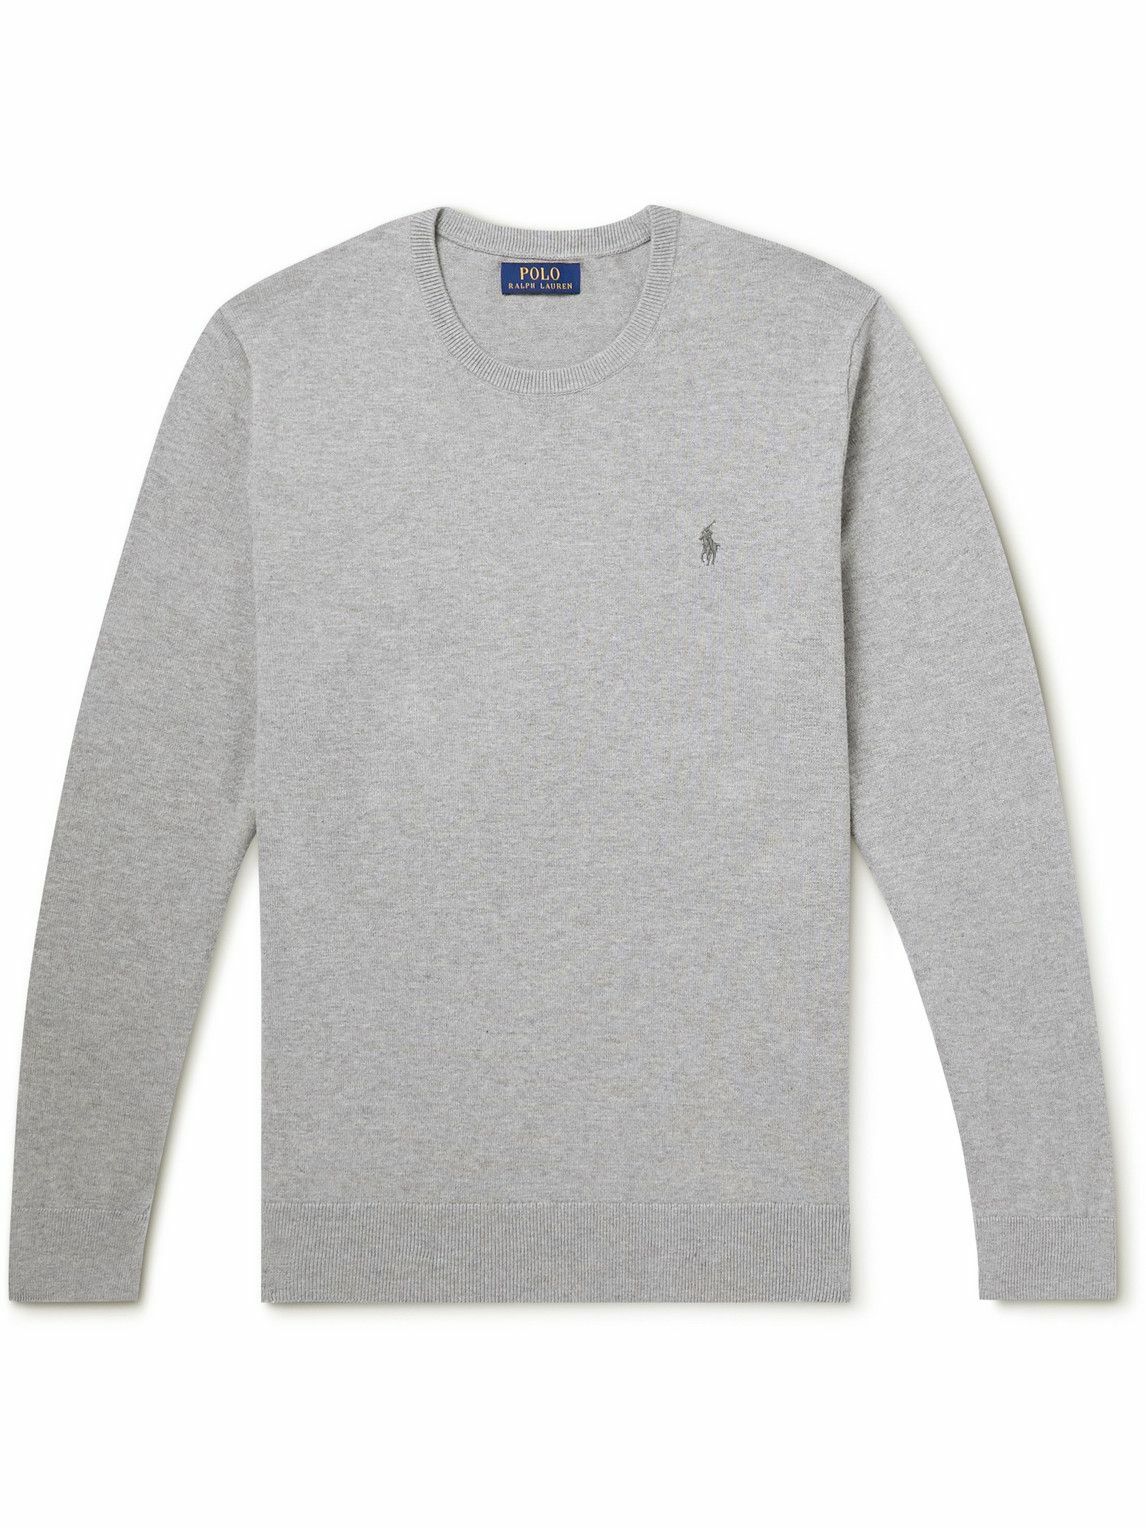 Polo Ralph Lauren - Logo-Embroidered Cotton and Cashmere-Blend Sweater - Gray